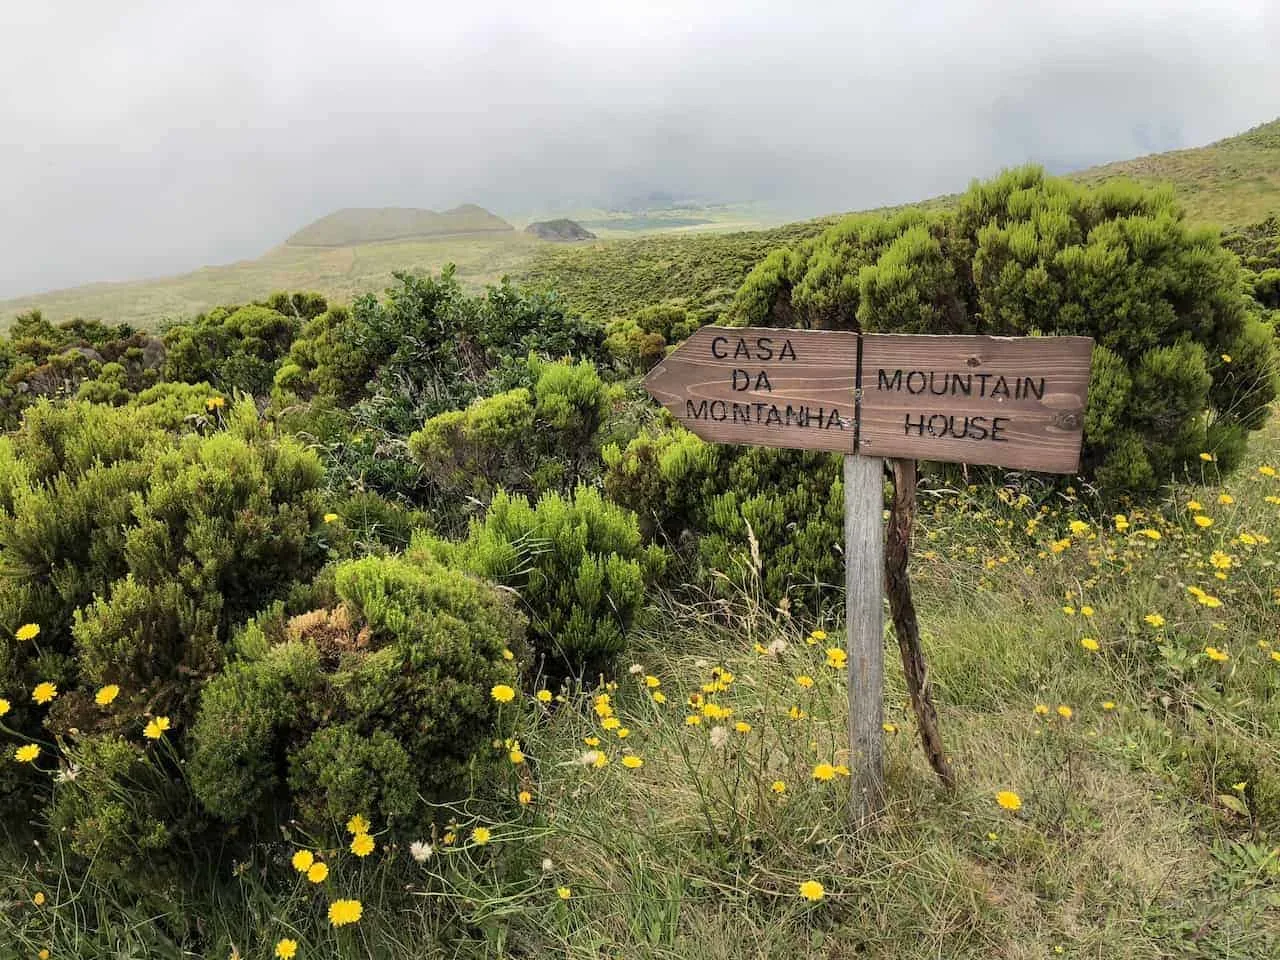 End of Mount Pico Trail